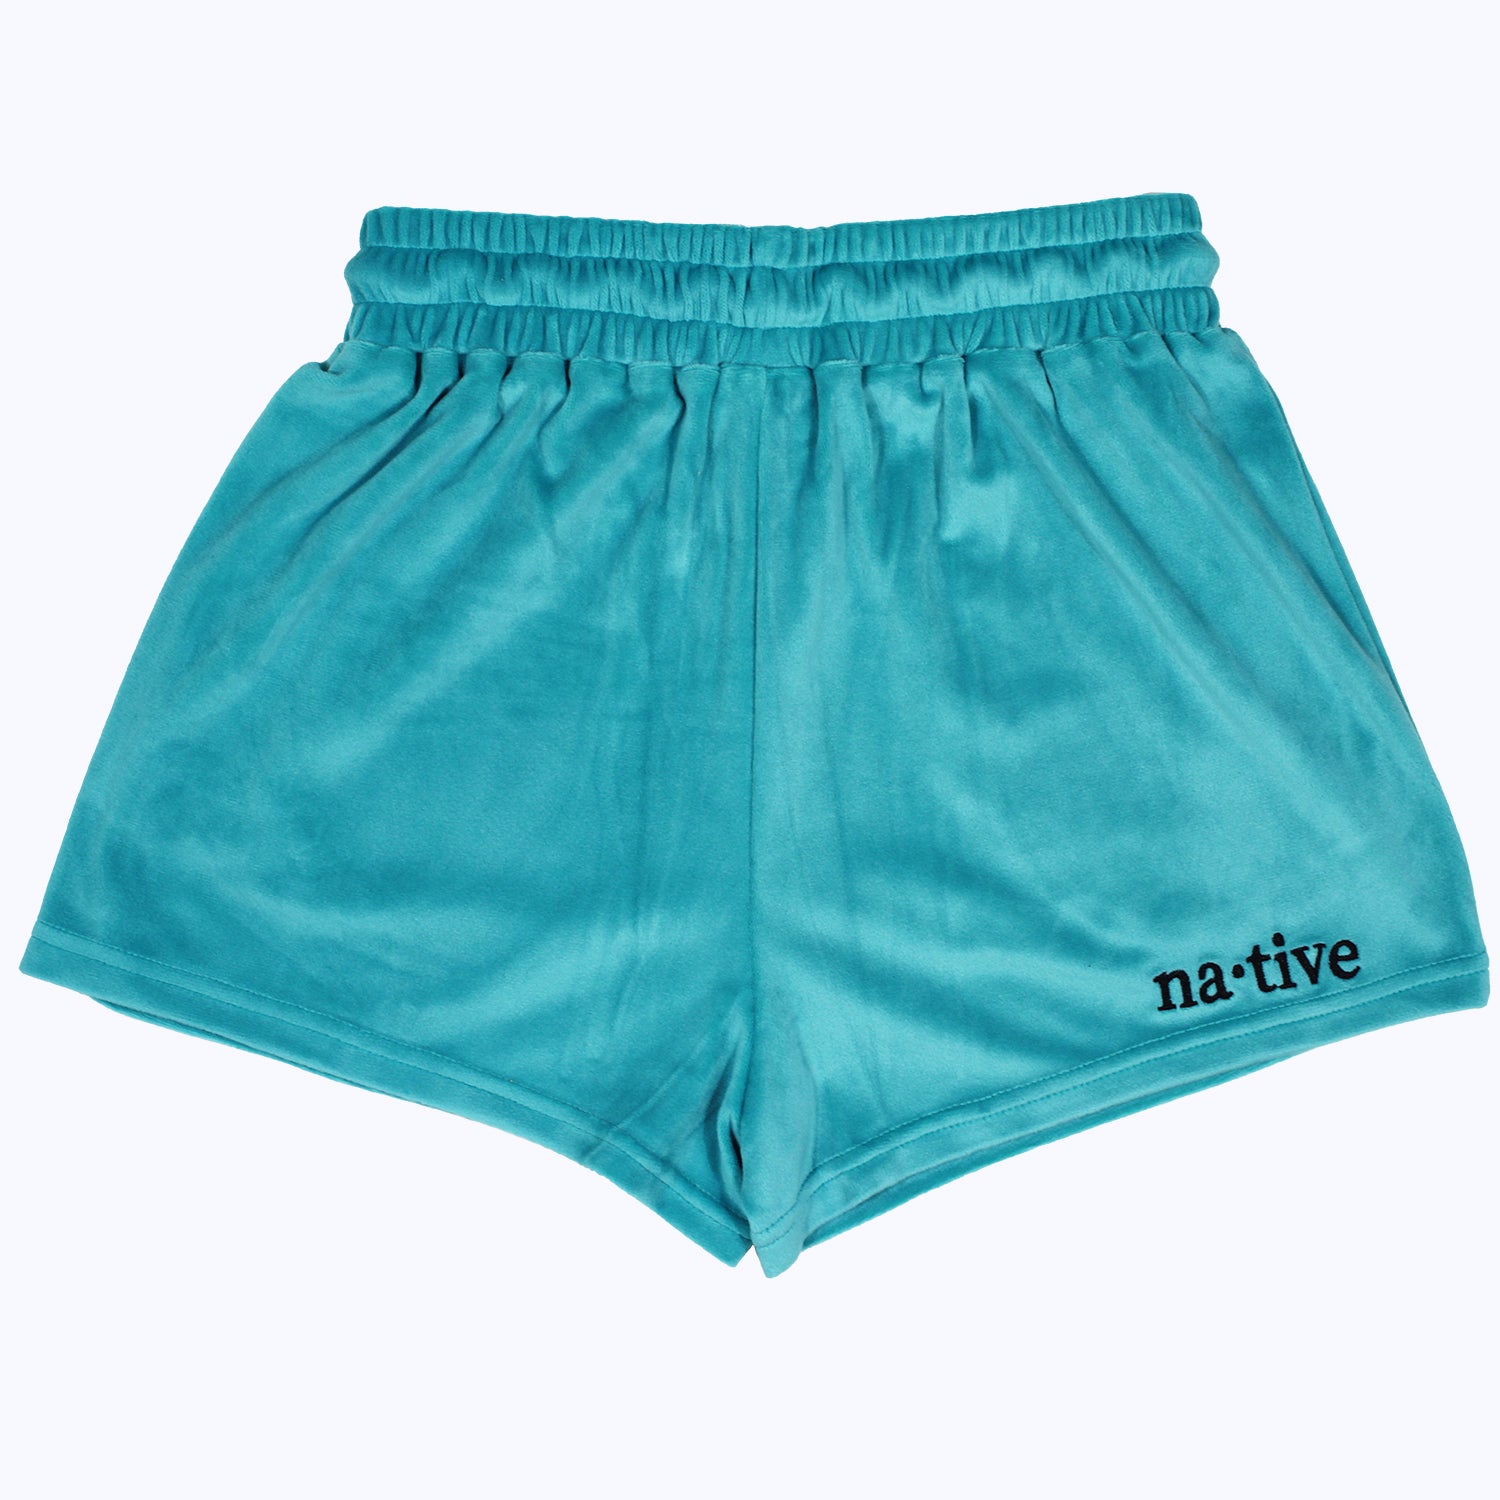 velour shorties in turquoise